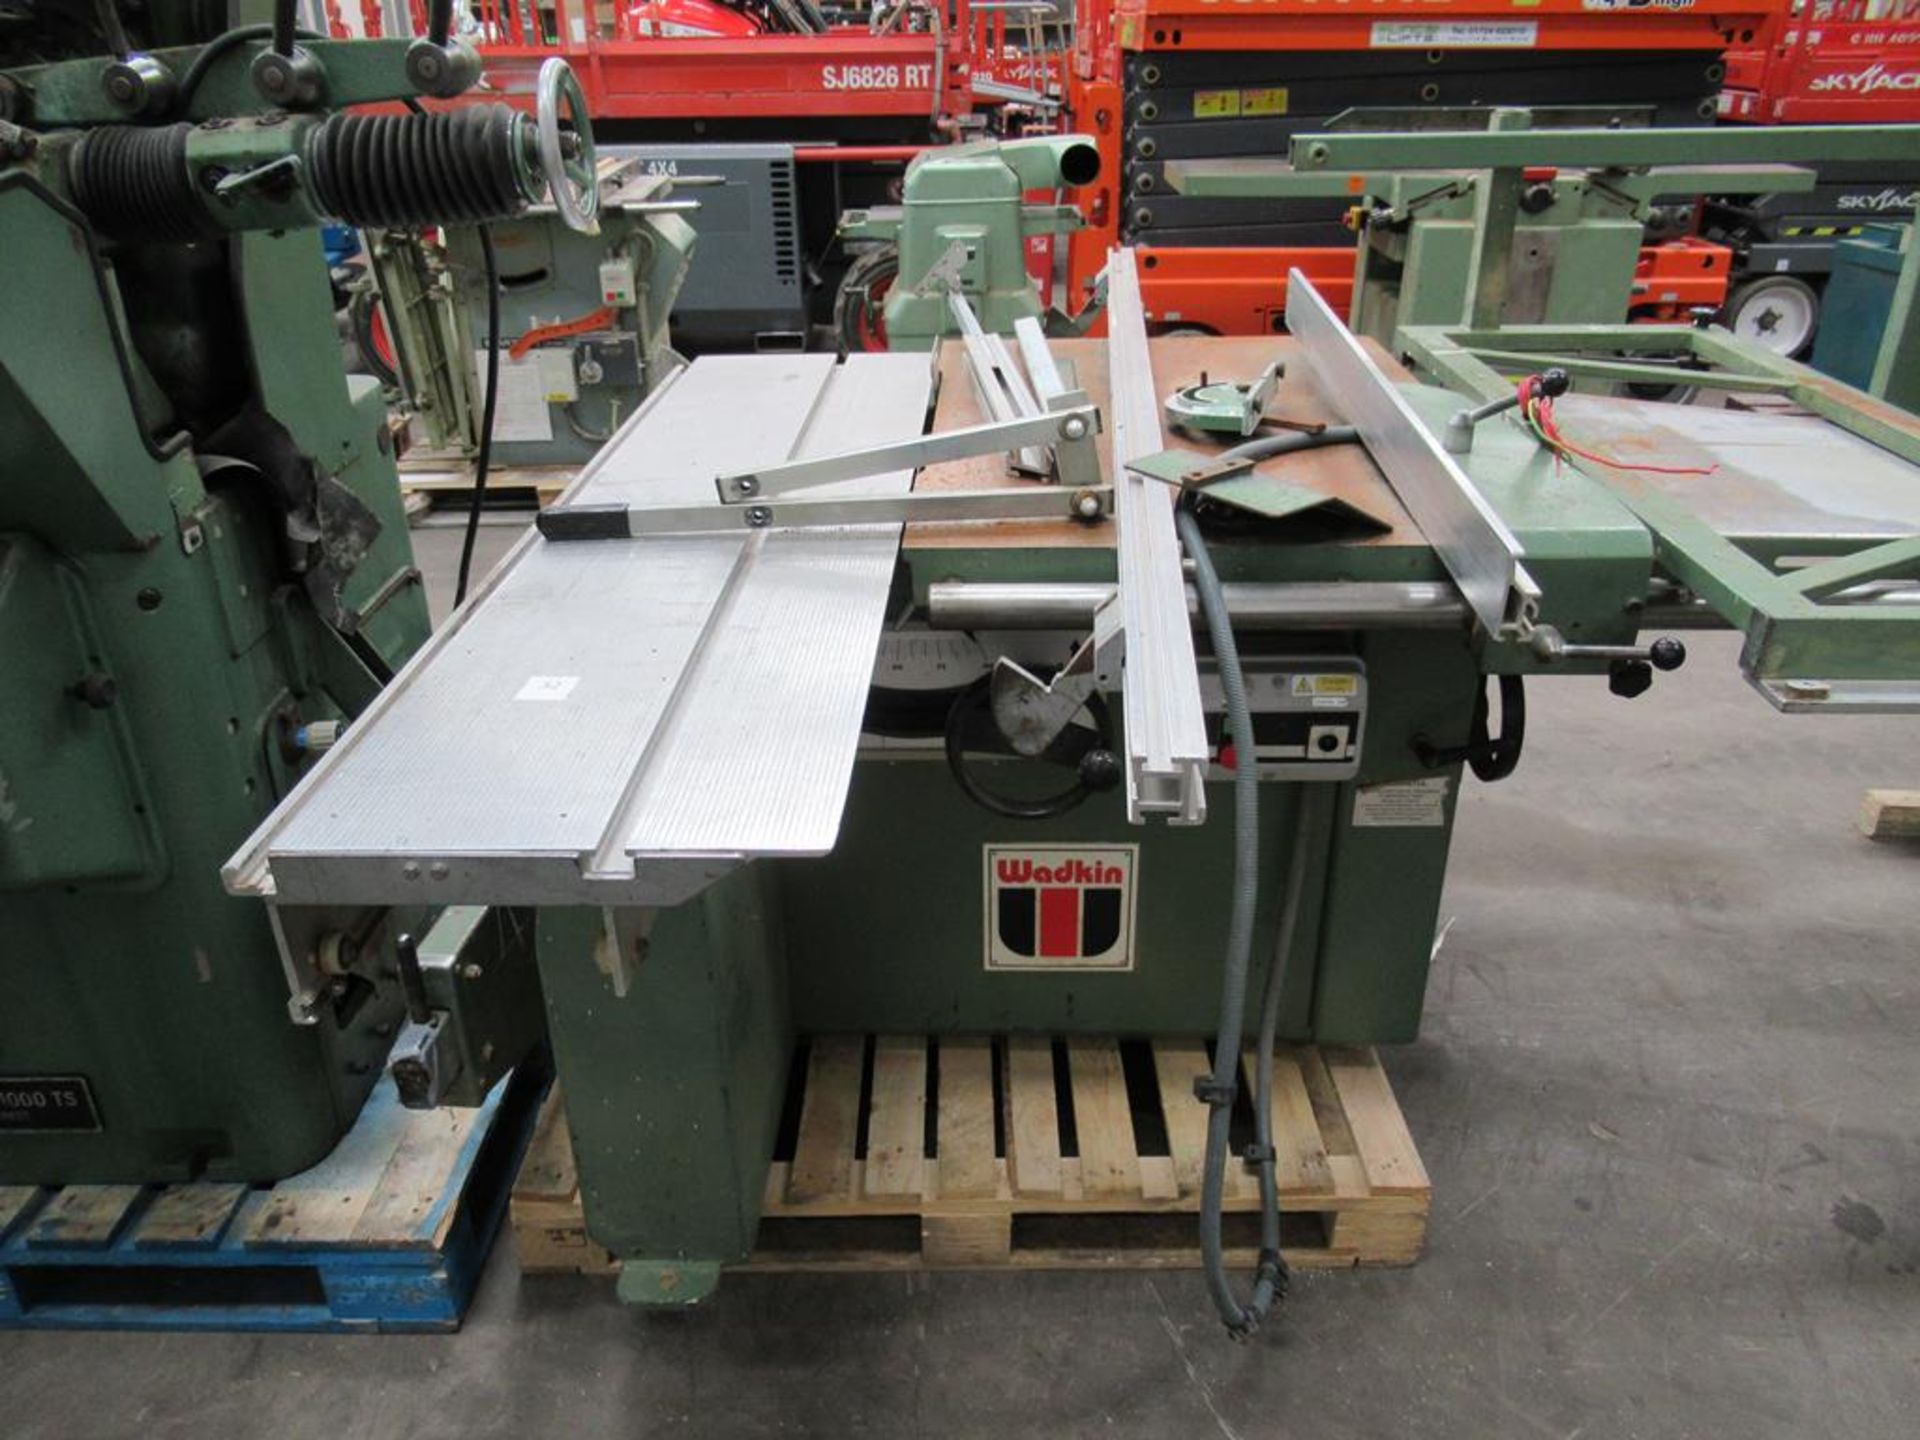 Wadkin CP15 Panel Saw Serial No89106 3 phase - Image 2 of 4